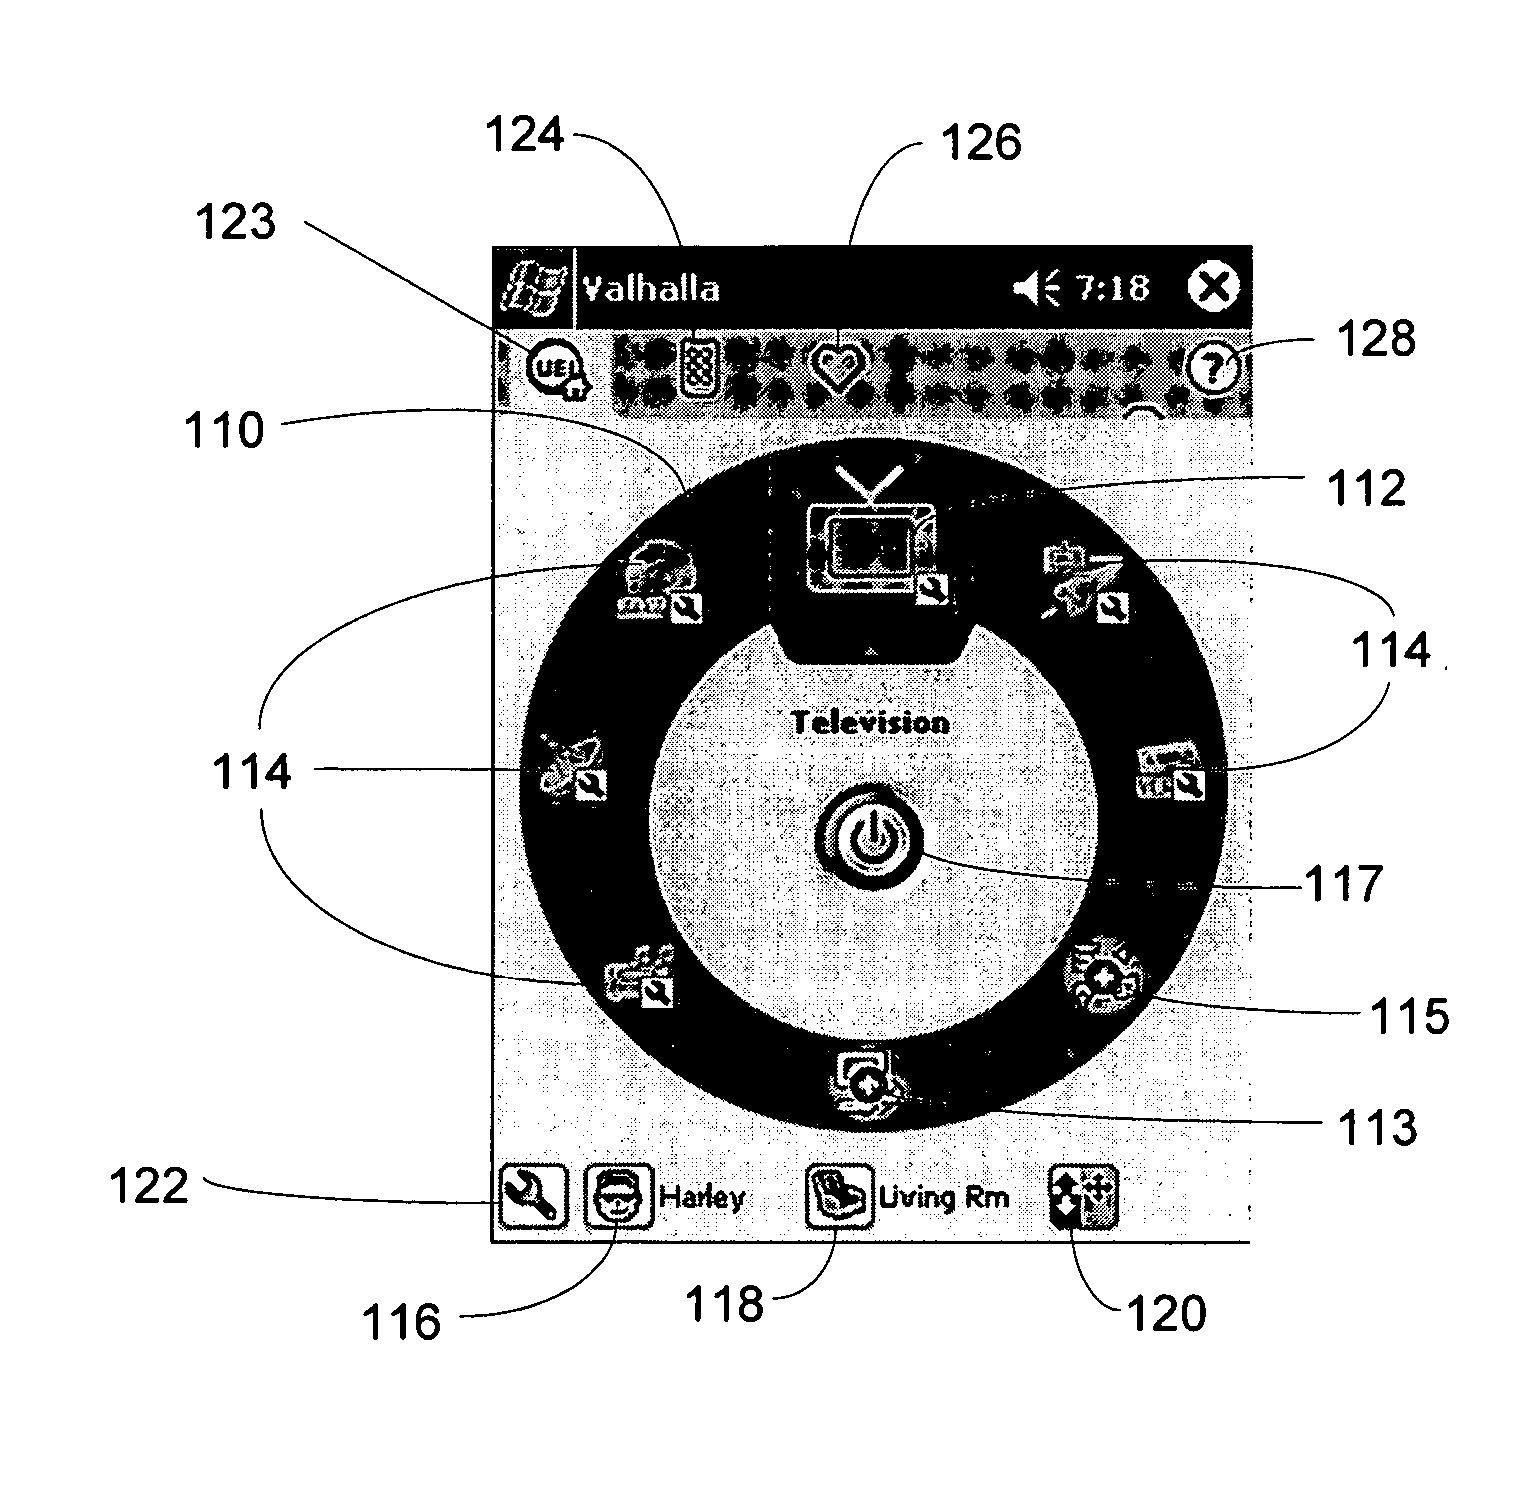 User interface for a remote control application